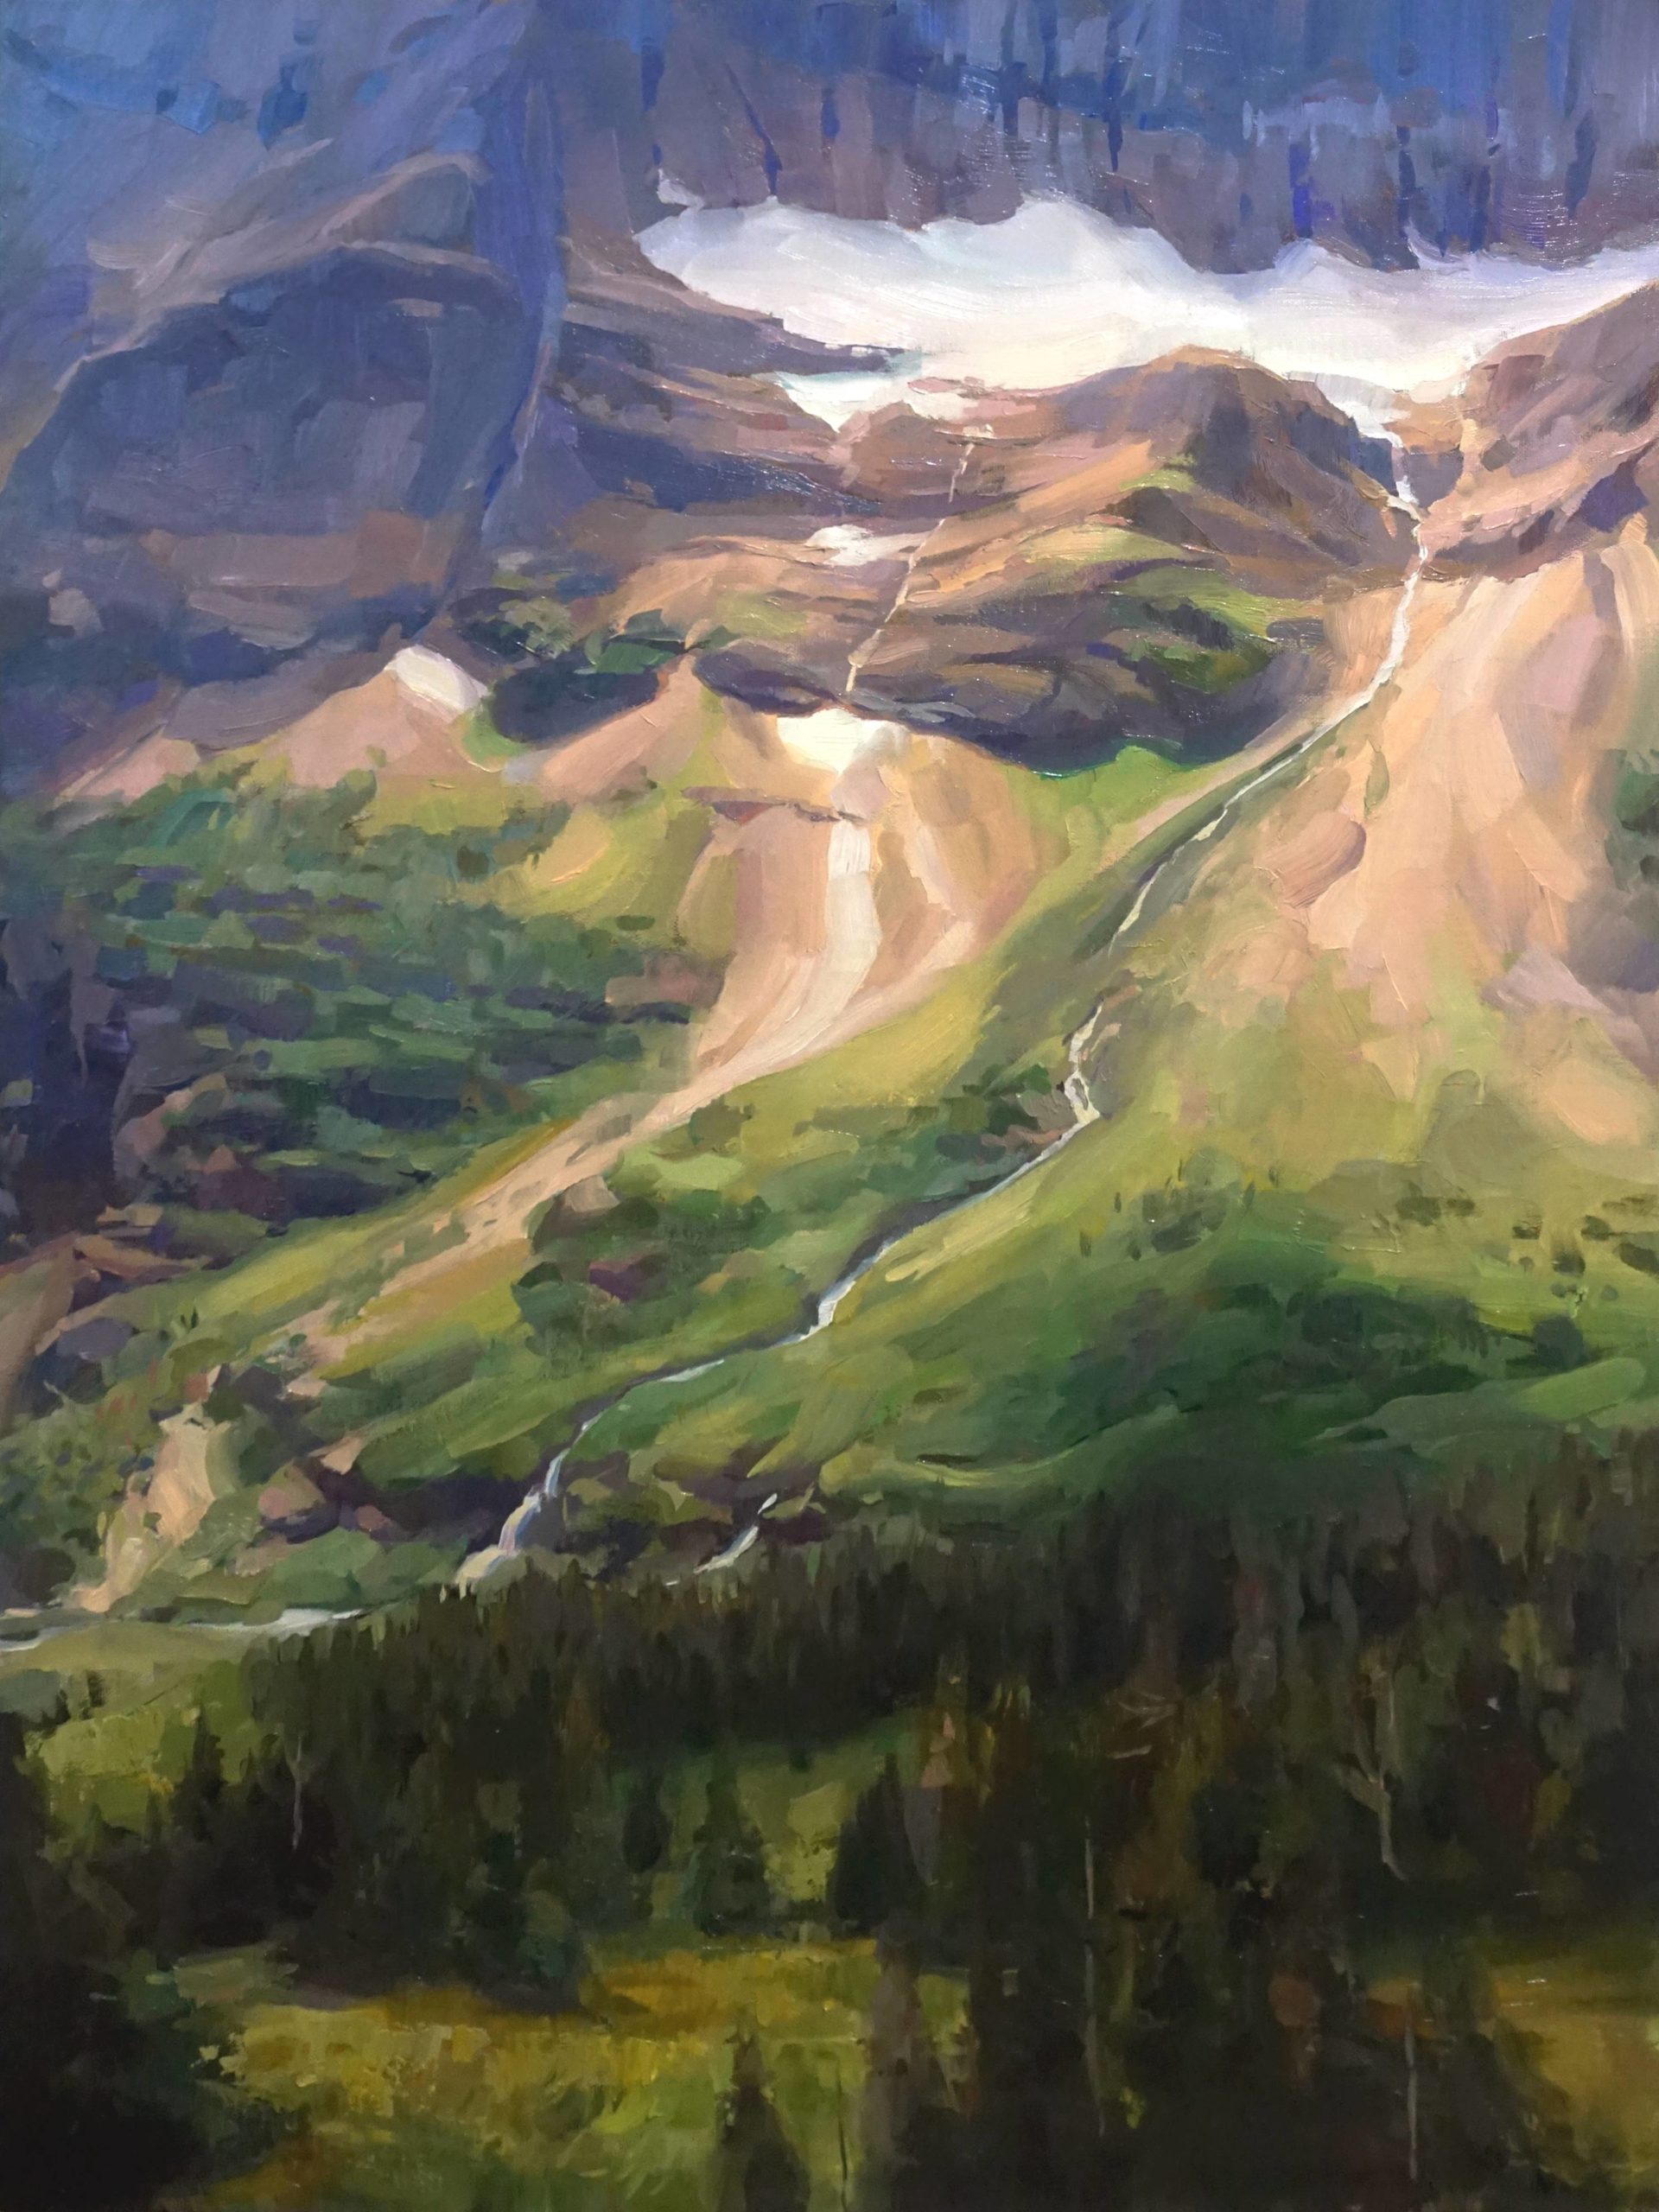 How to paint landscapes